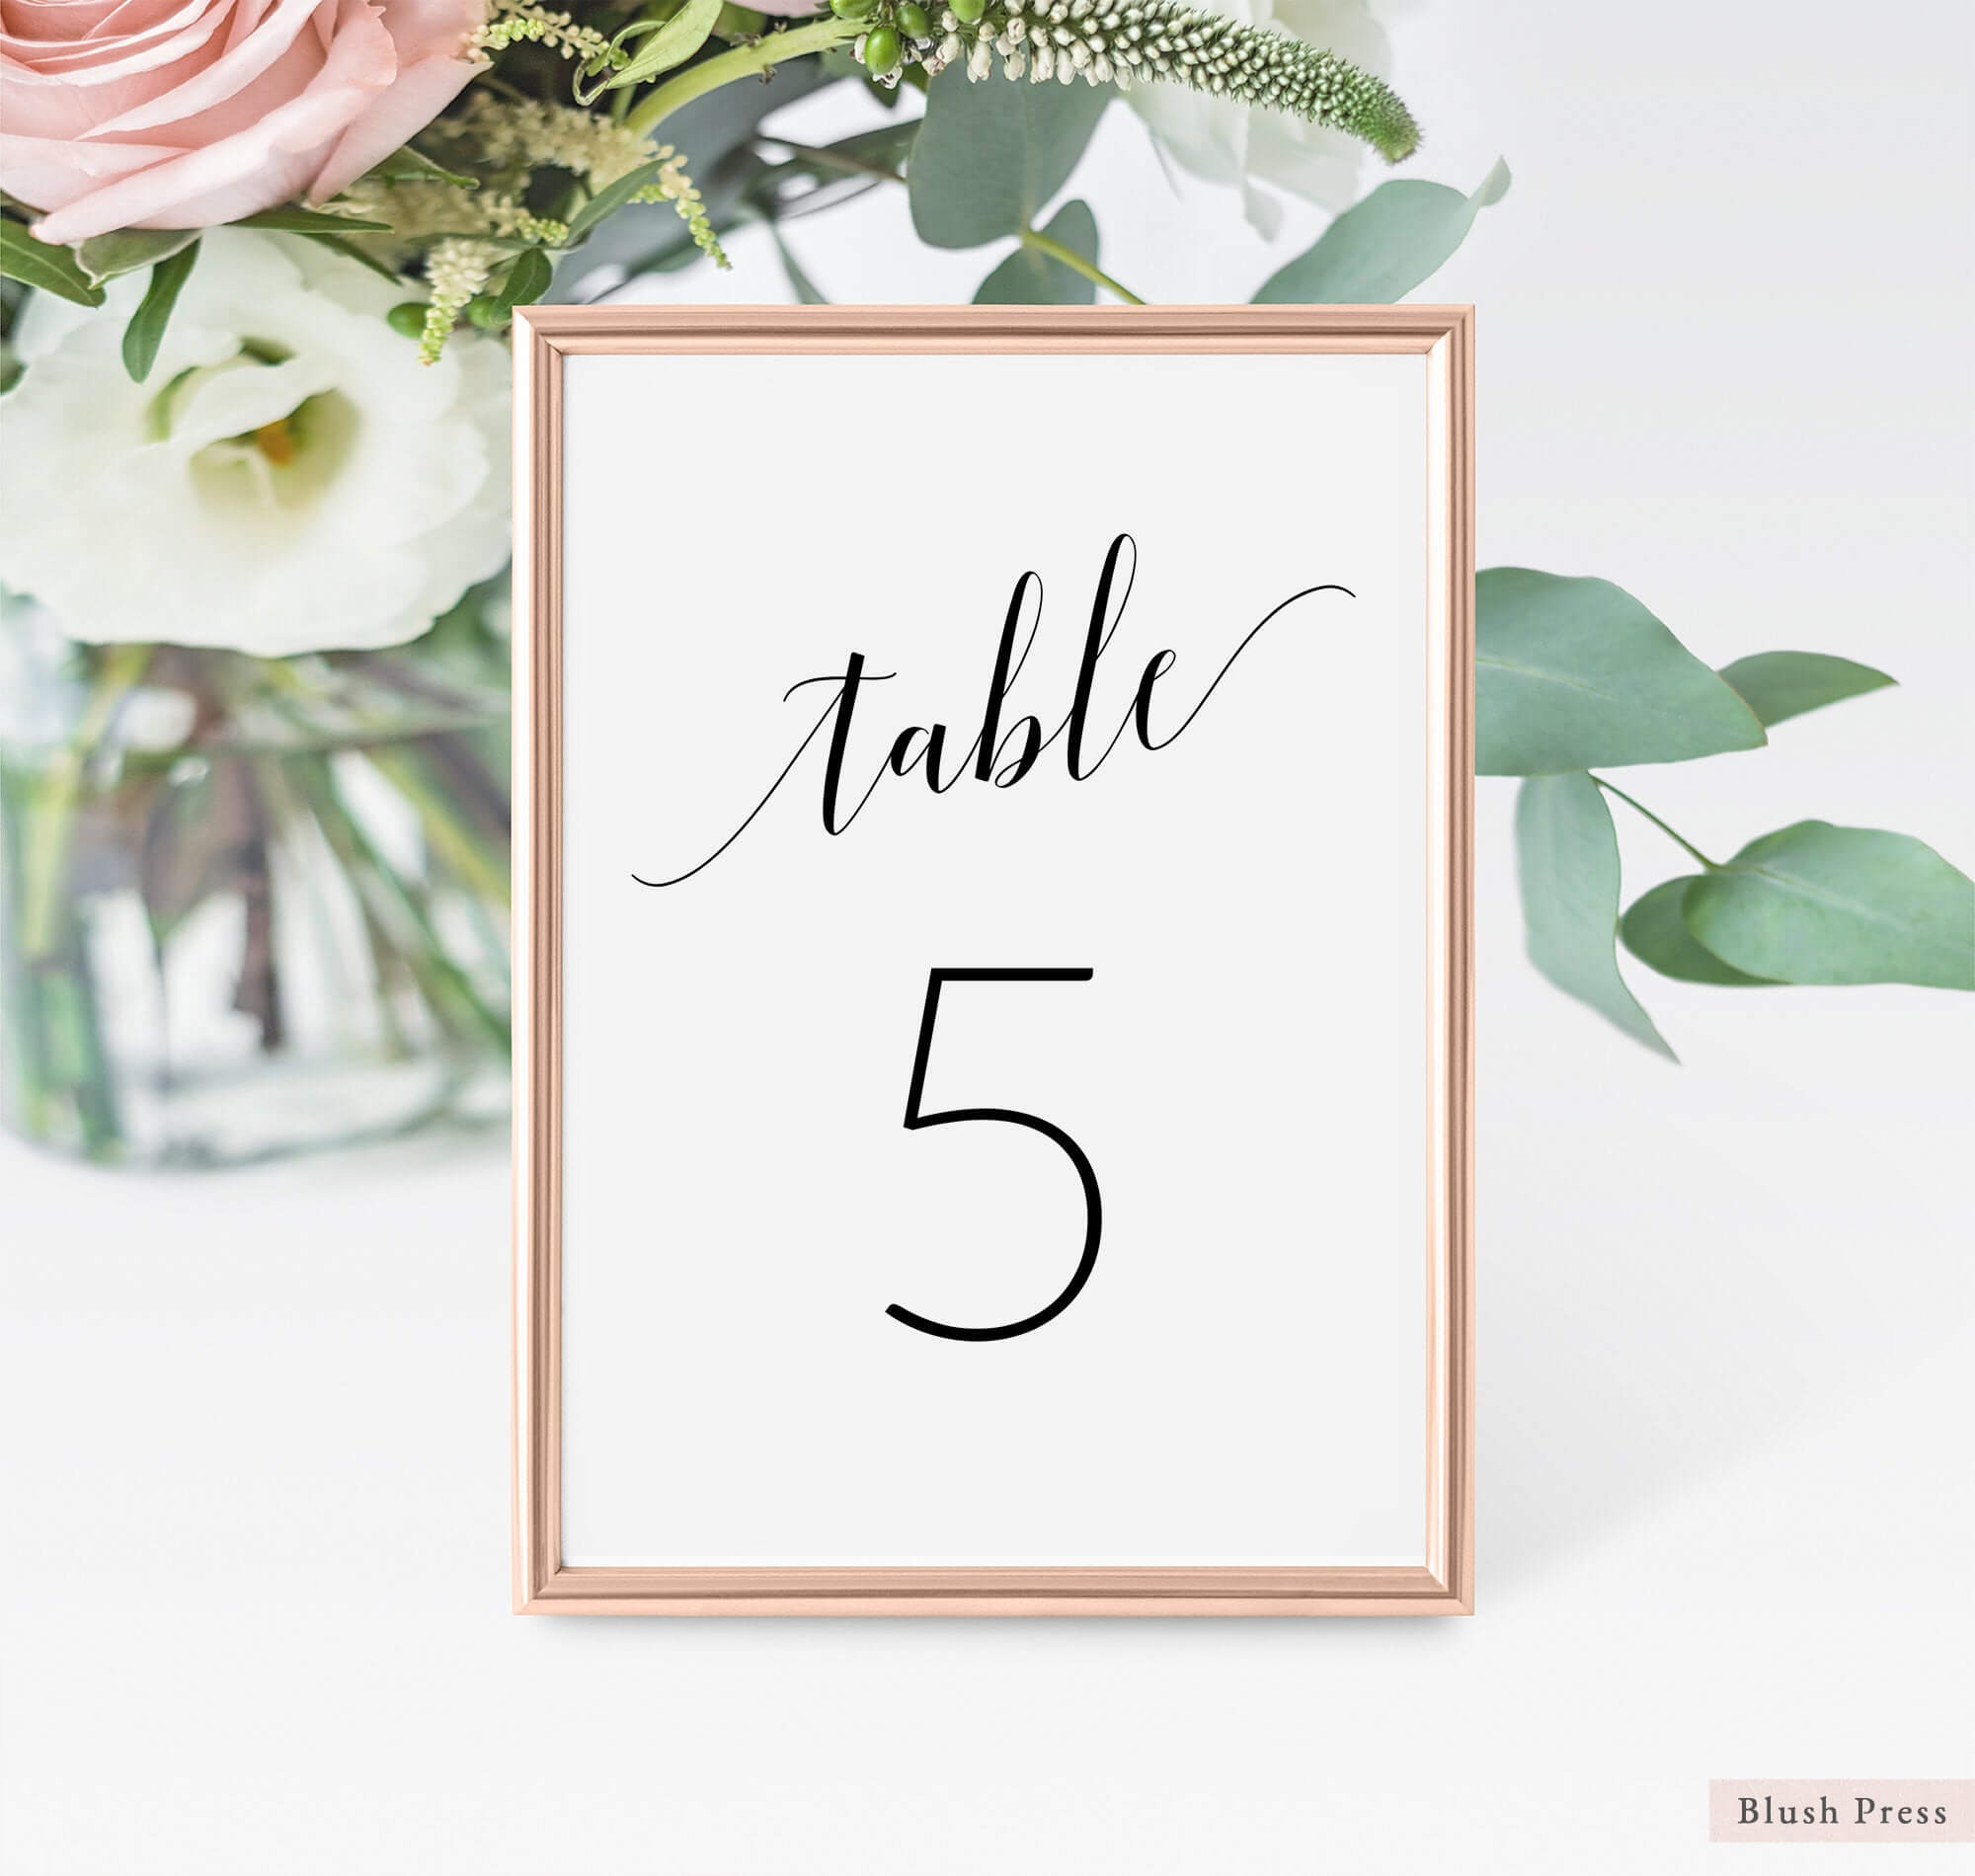 Wedding Table Number Cards Template, Printable Table Numbers Wedding, Table  Seating Card, Table Numbers Printable, Table Card Number Sav 062 Pertaining To Table Number Cards Template